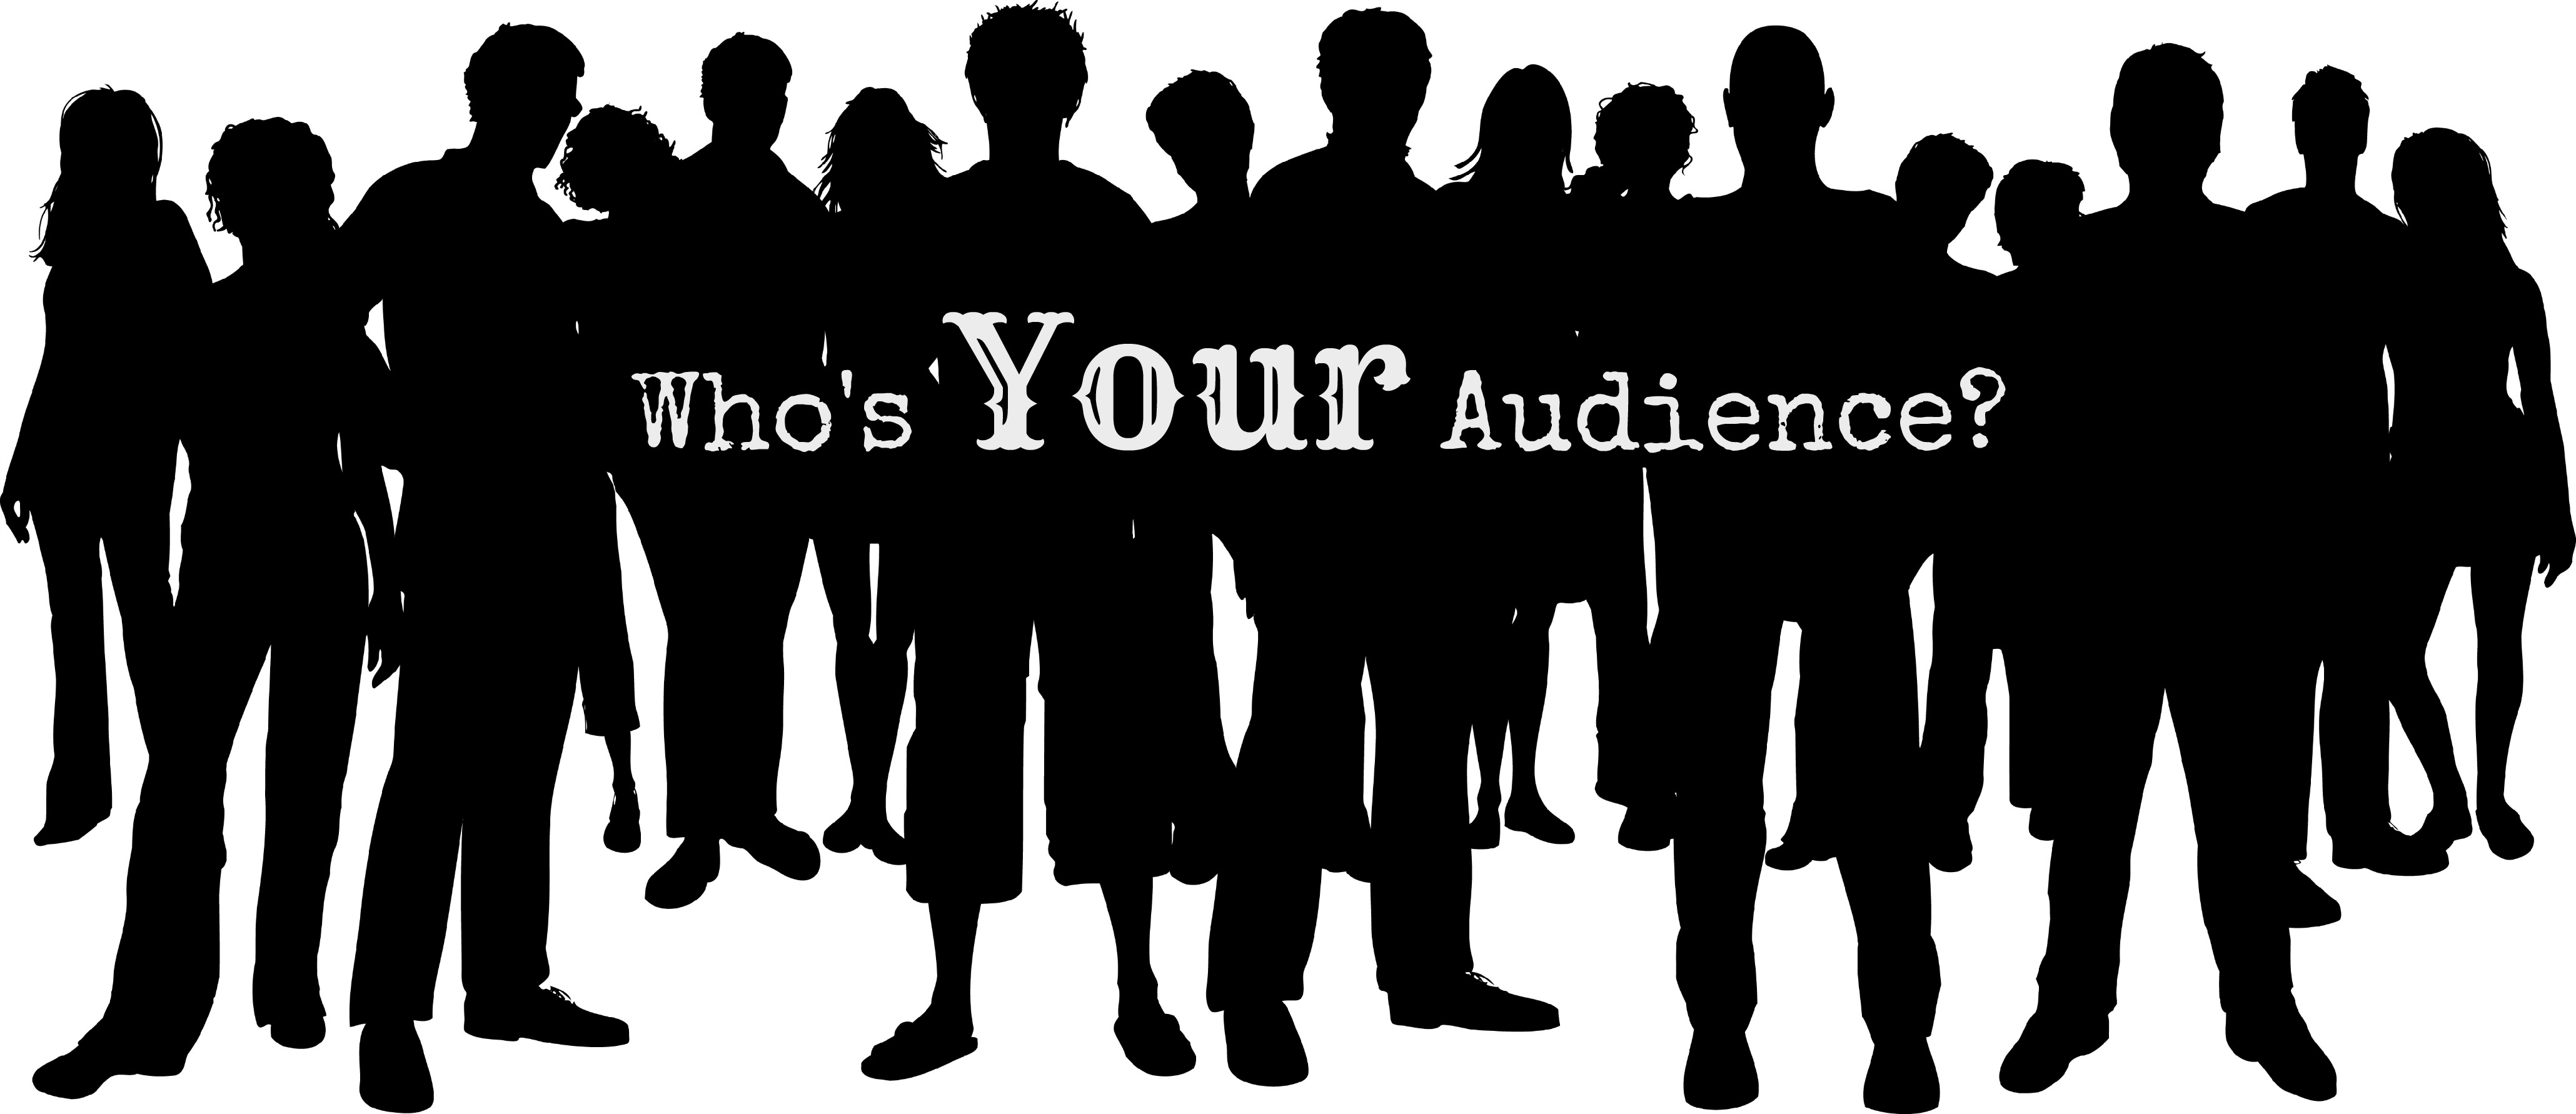 A black silhouette of a crowd of people has the words “Who’s Your Audience?” written across it in white. 